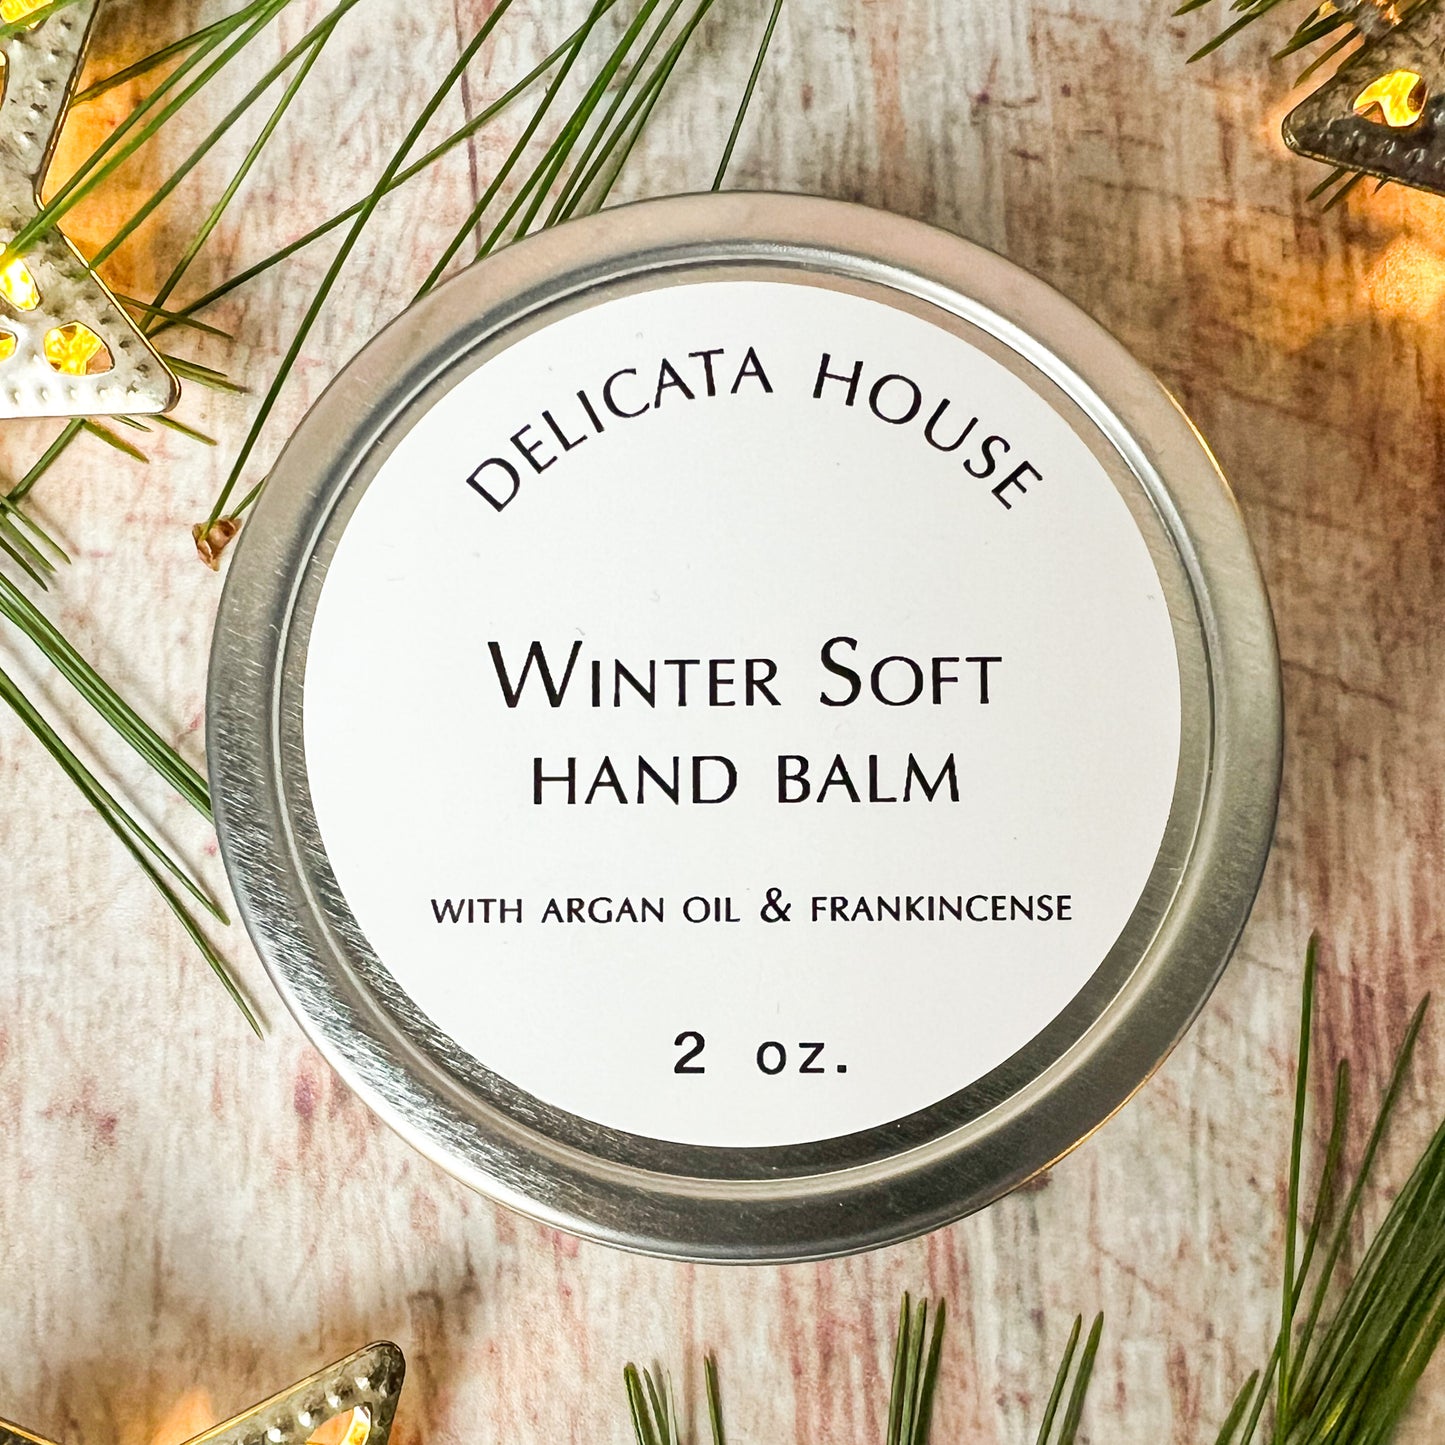 Balm - WinterSoft Hand Balm - Winter Balm for Dry Chapped Skin - Moisturizing Hand Balm - with Argan Oil, Carrot Seed, Frankincense, and Rose Geranium Essential Oils